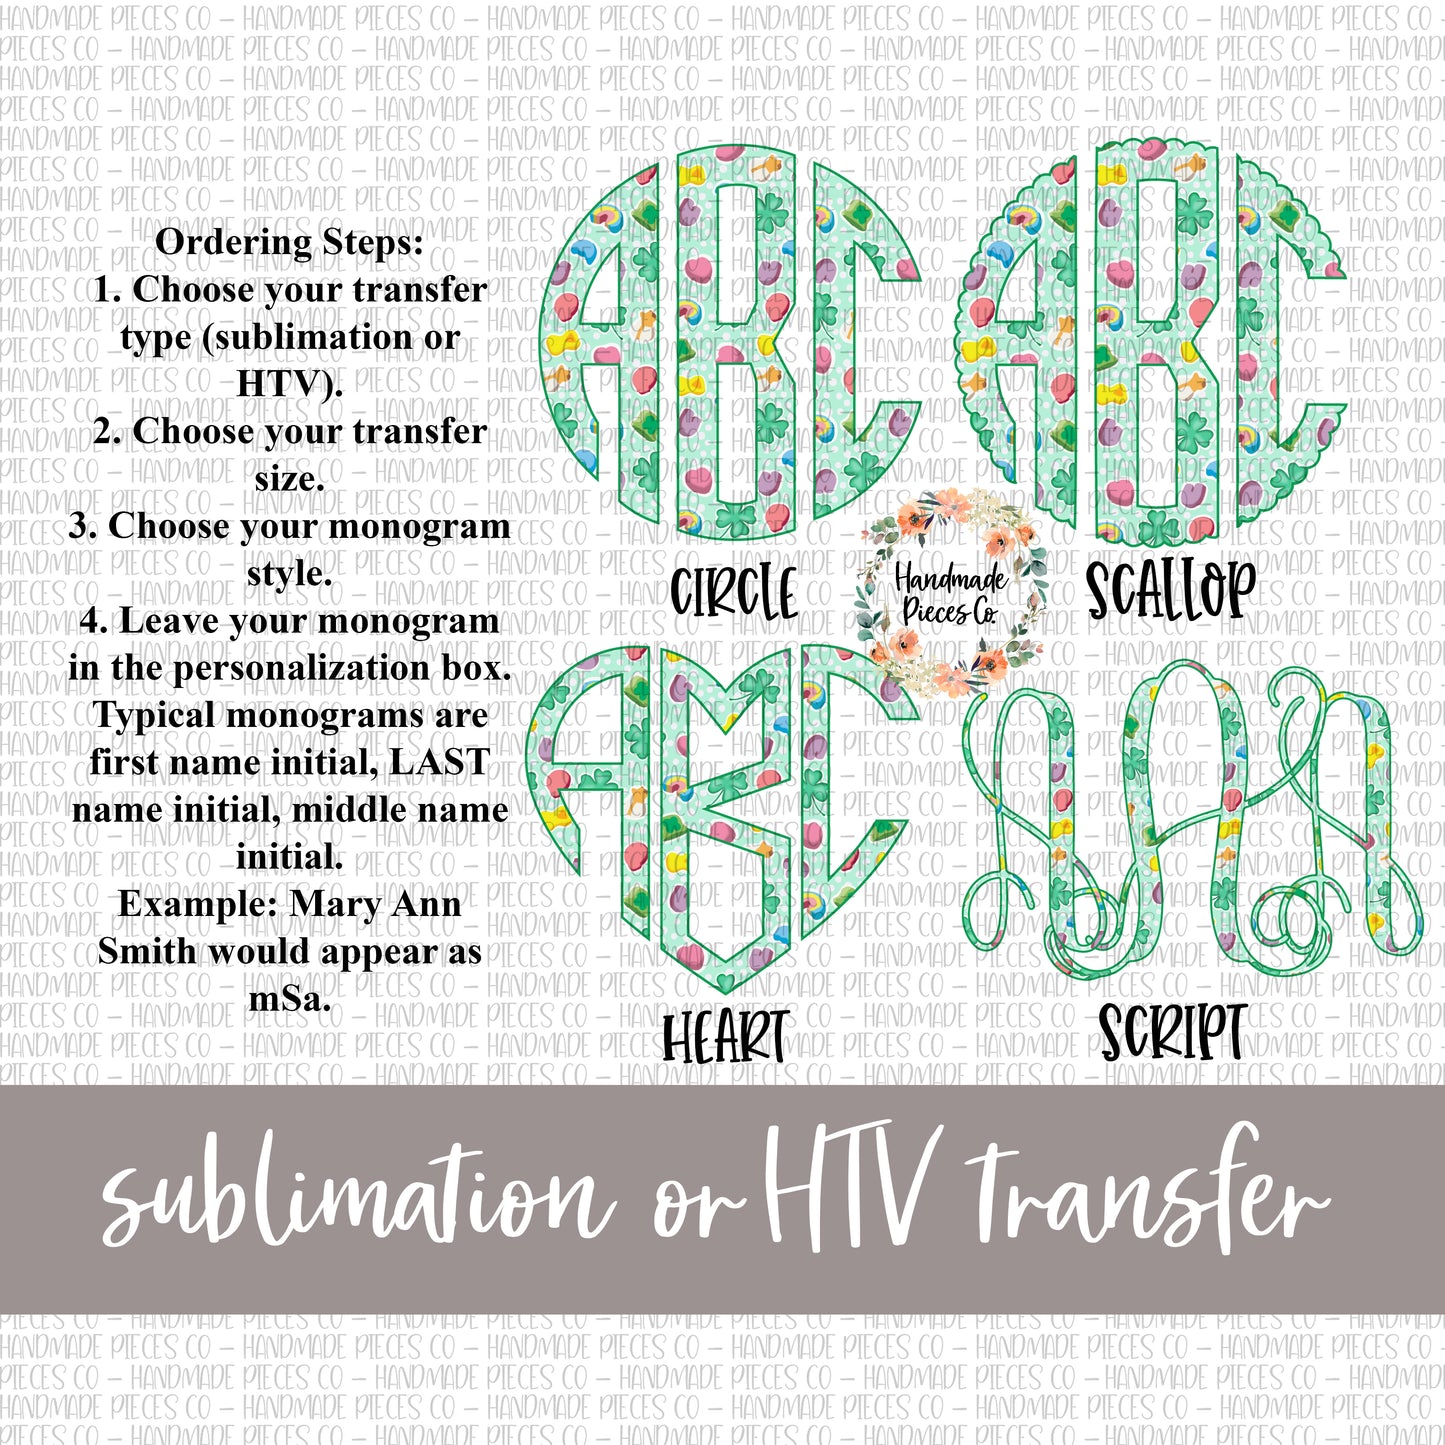 Lucky Charm Monogram, Version 2 - Sublimation or HTV Transfer